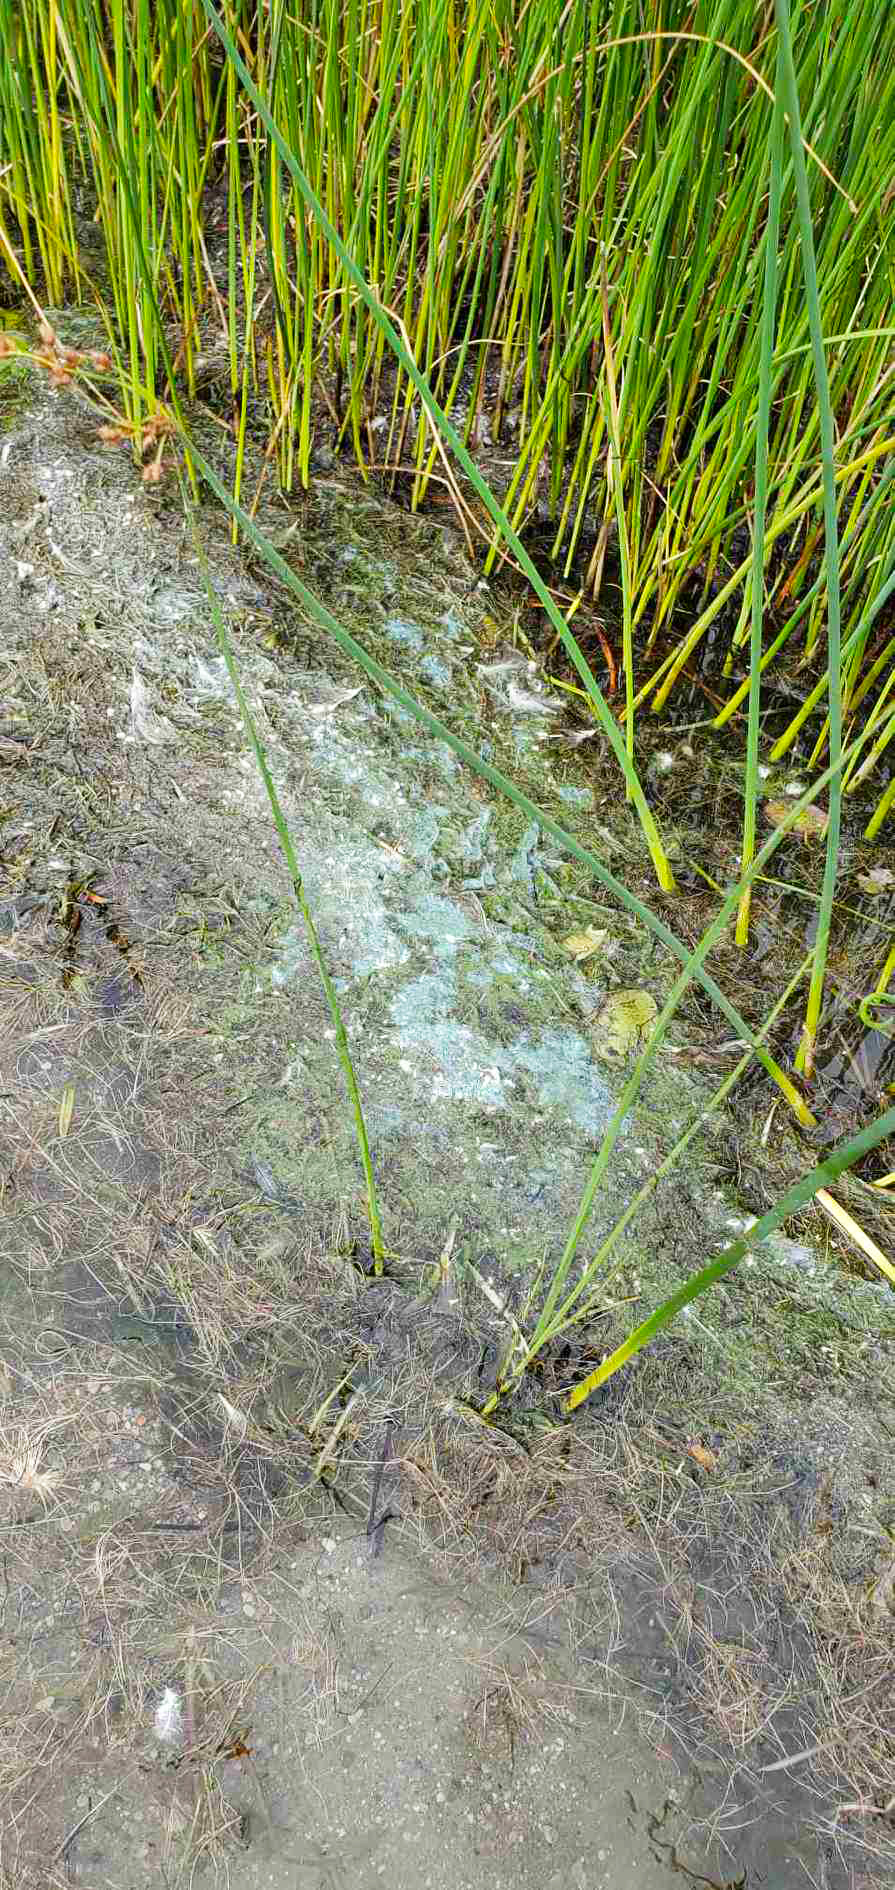 Small slick of blue-green algae found nearshore, showing the distinguished blue colour well.